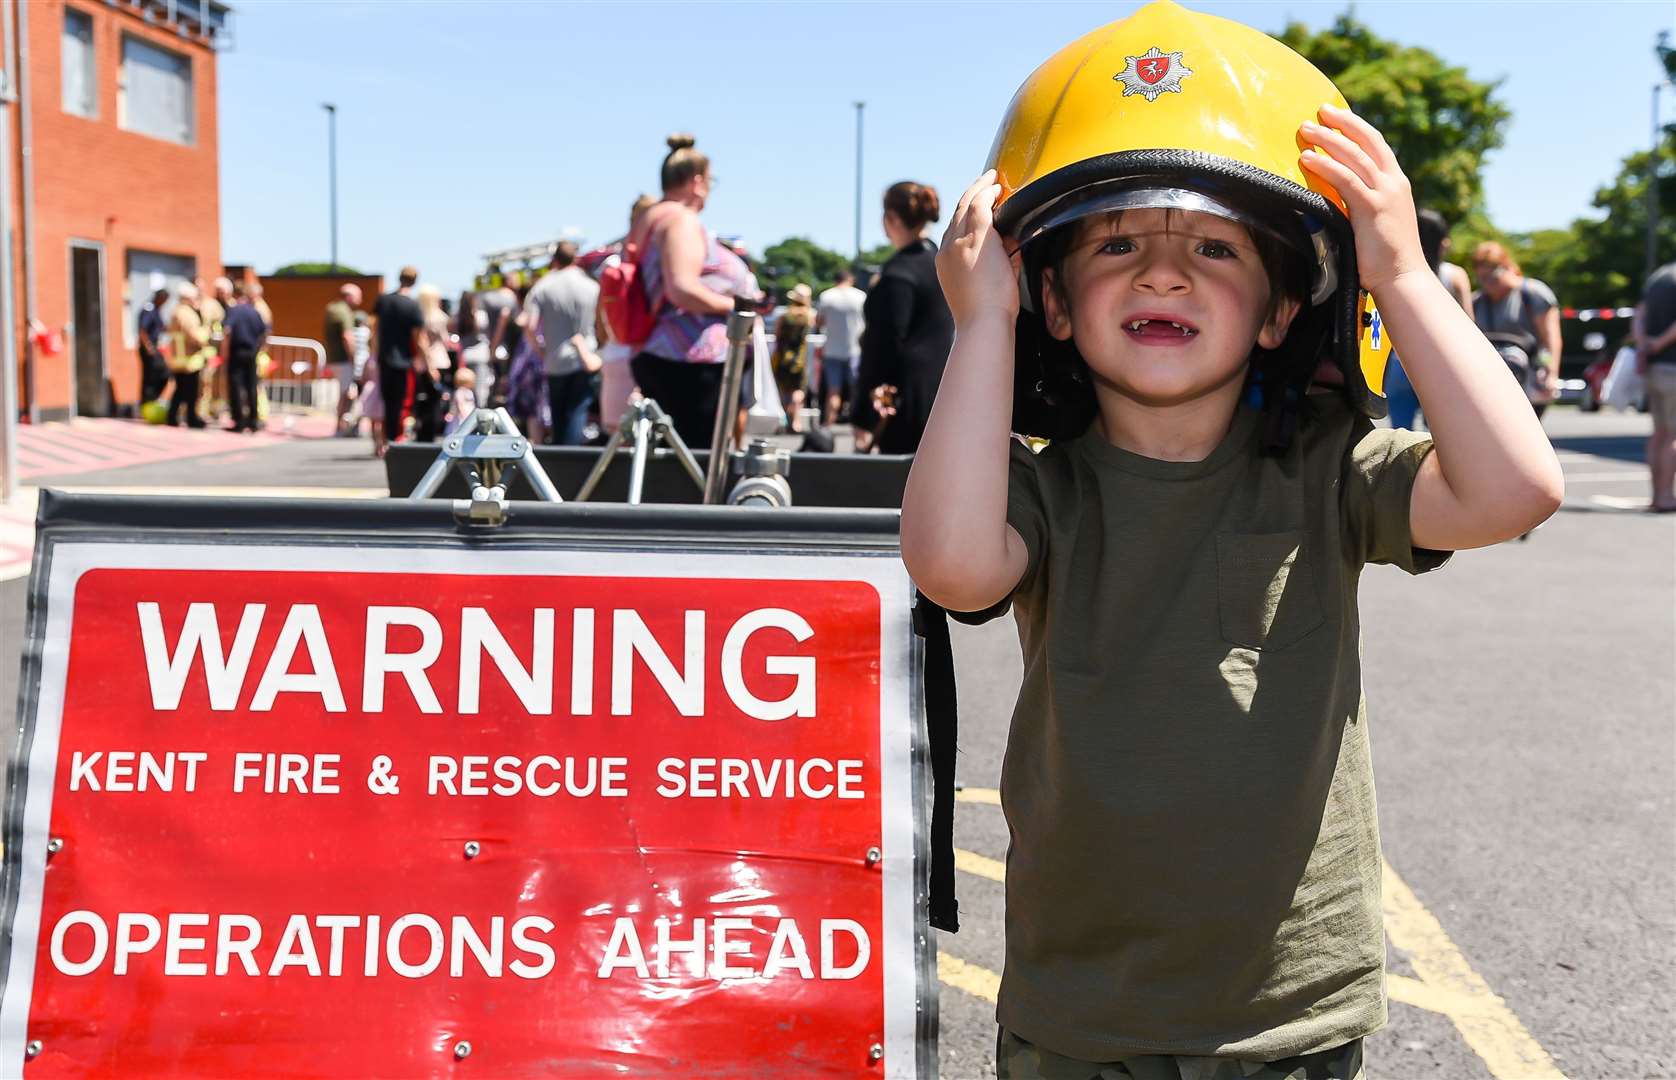 Firefighting fun at Ramsgate Fire Station Picture: Alan Langley